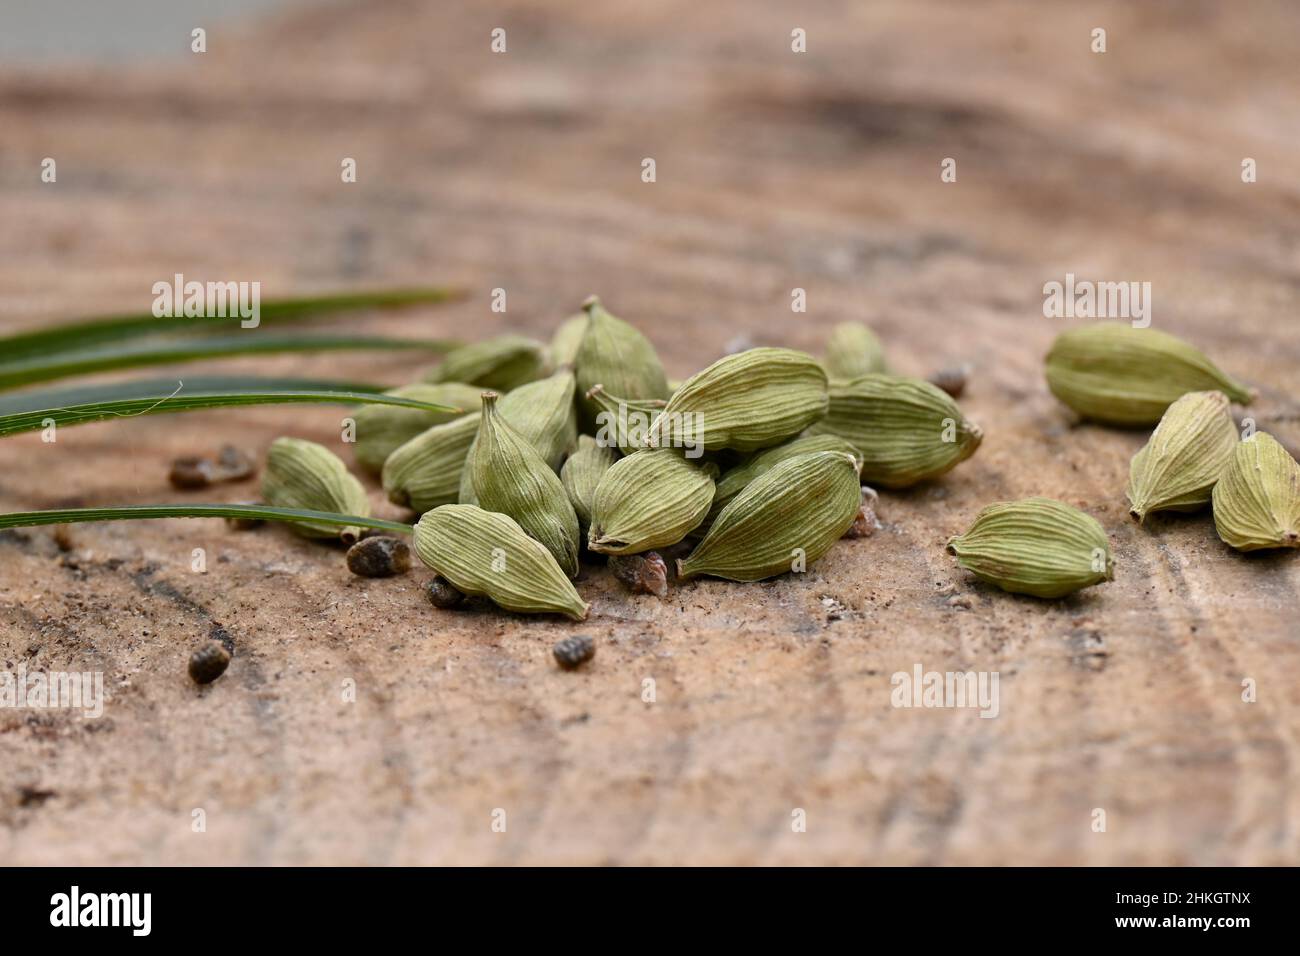 closeup the bunch green ripe cardamom with green leaves over out of focus wooden background. Stock Photo